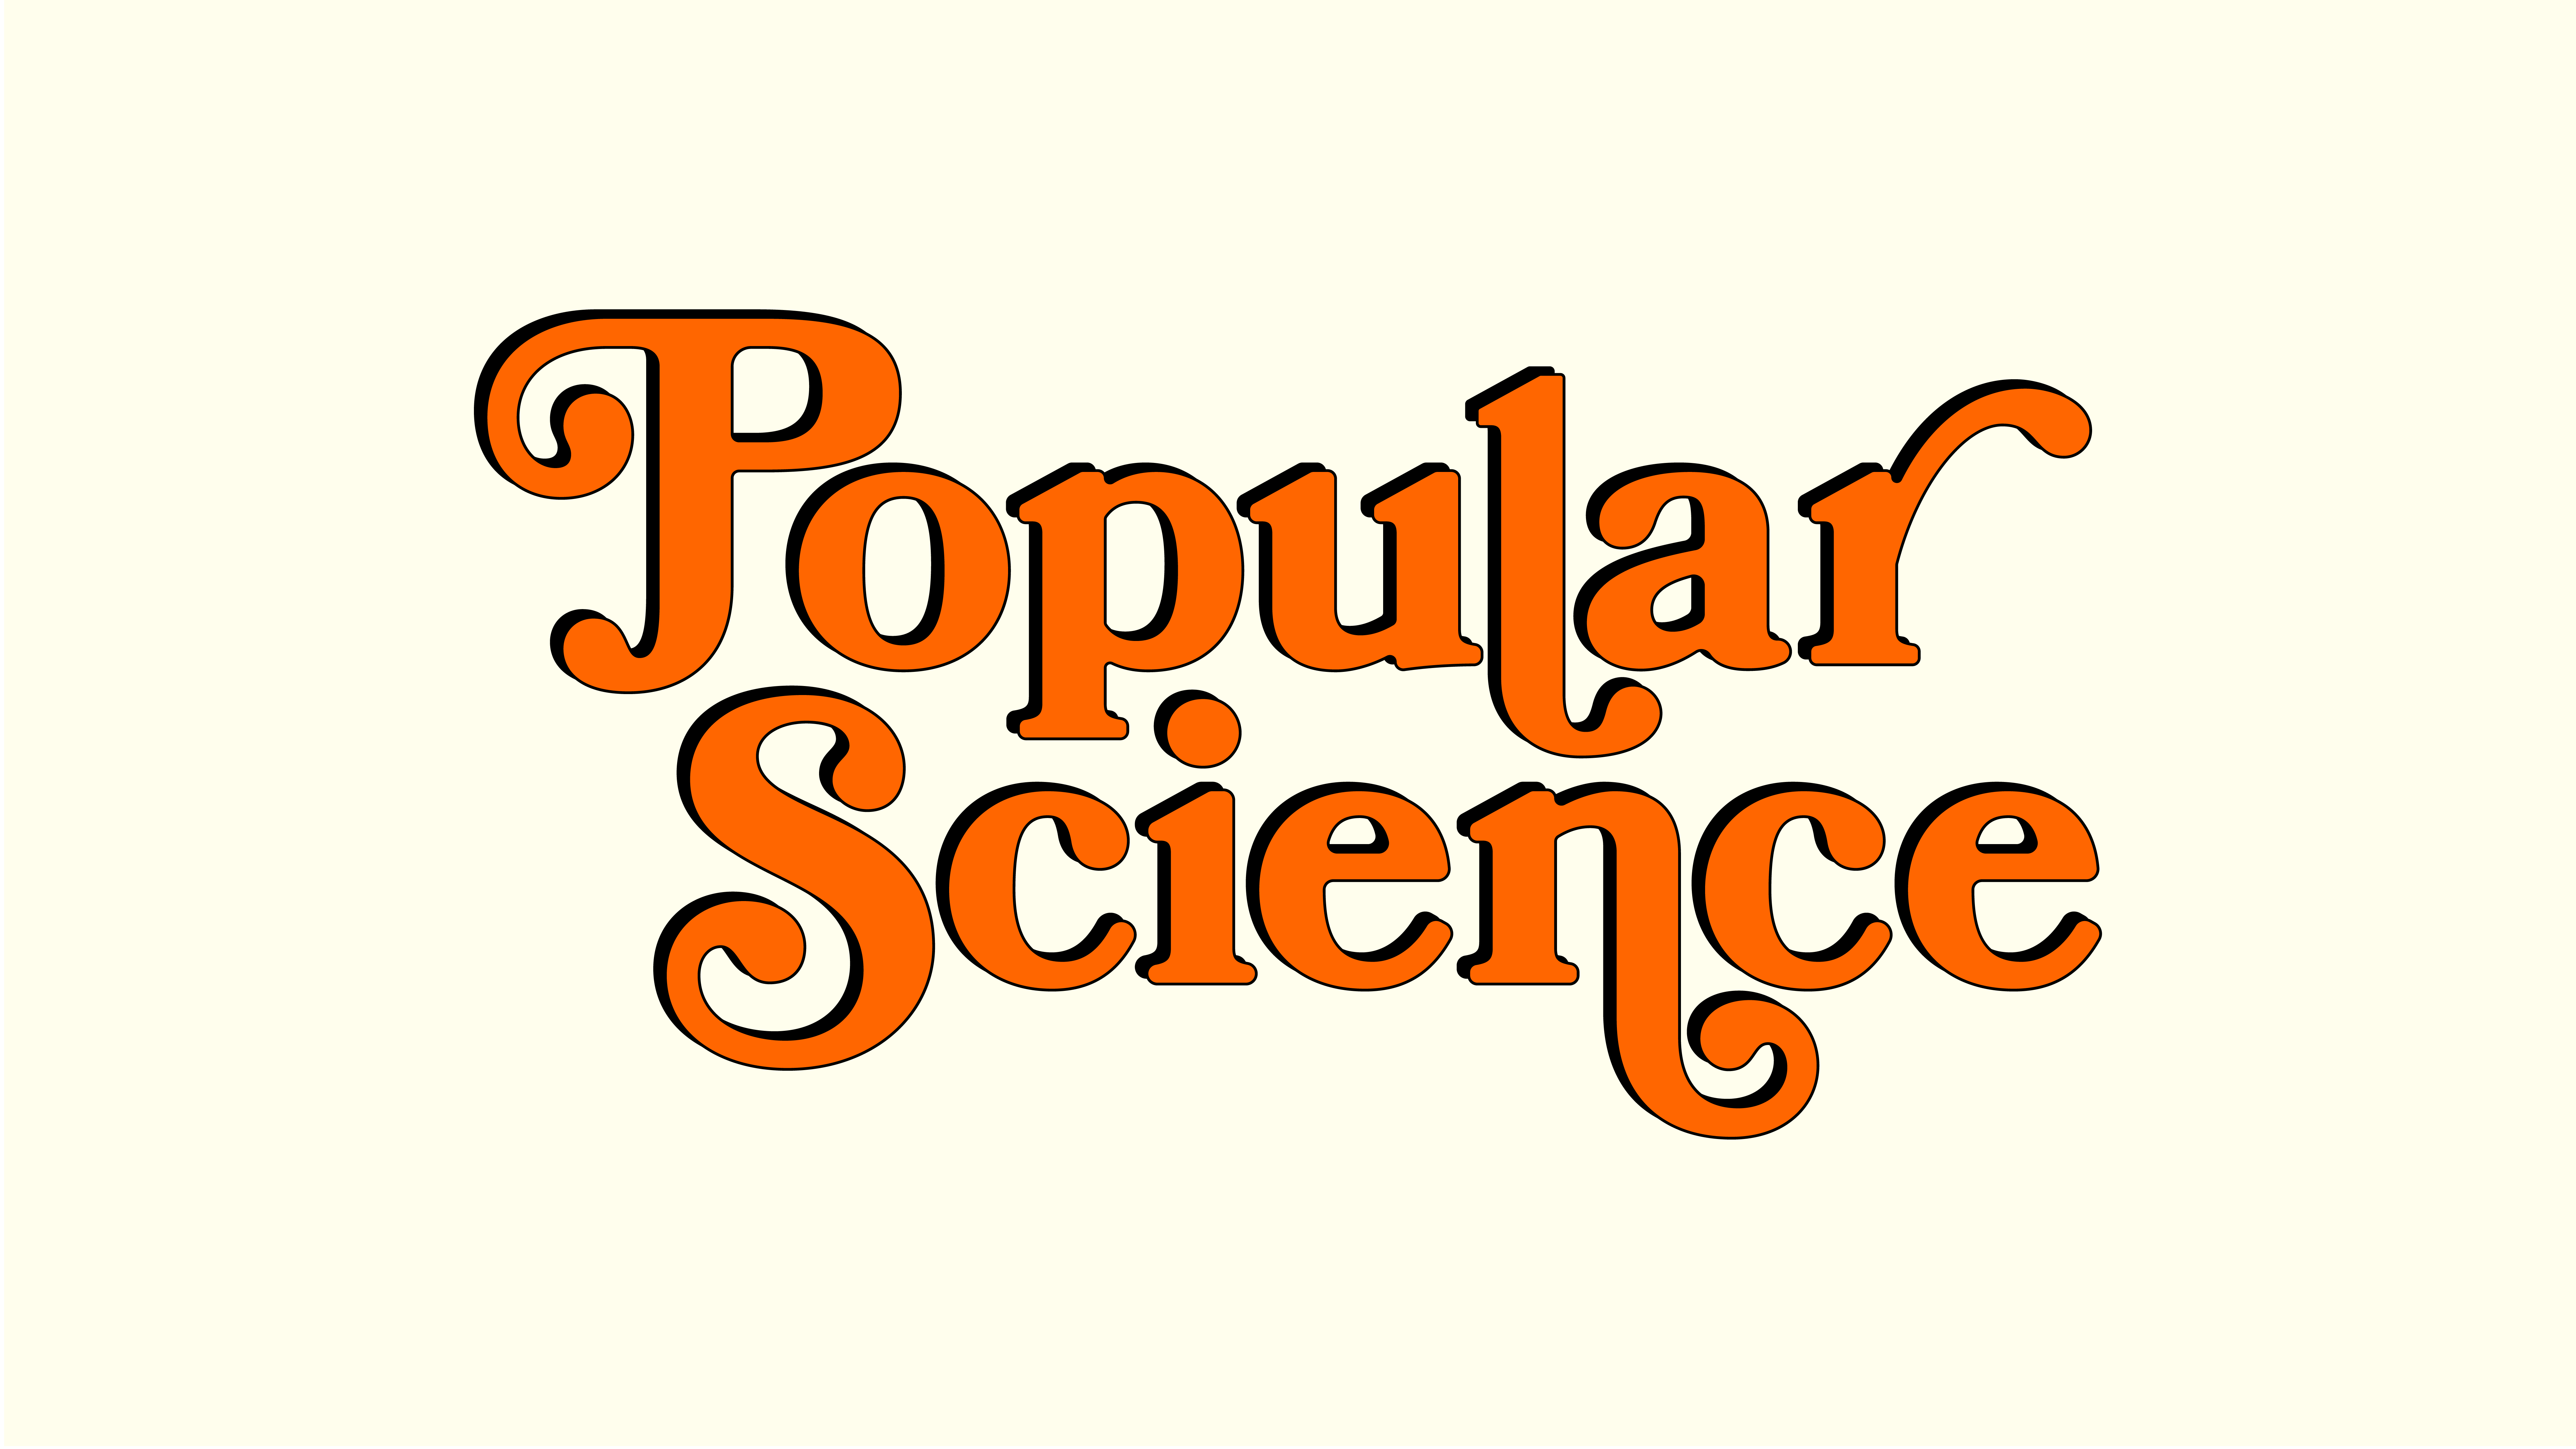 Big news: Popular Science is back on YouTube